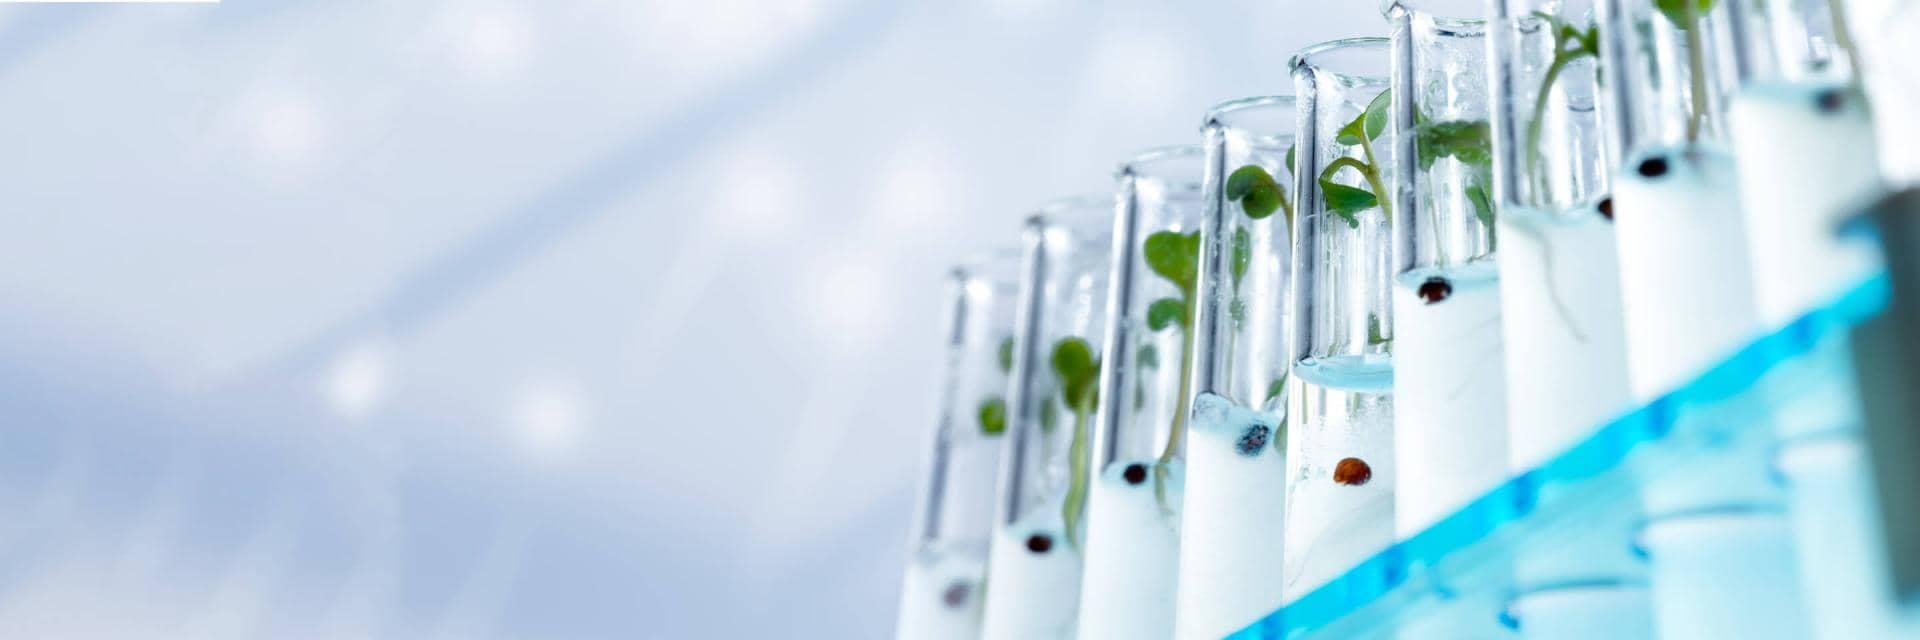  Green shoots are growing in a row of glass test tubes in a lab